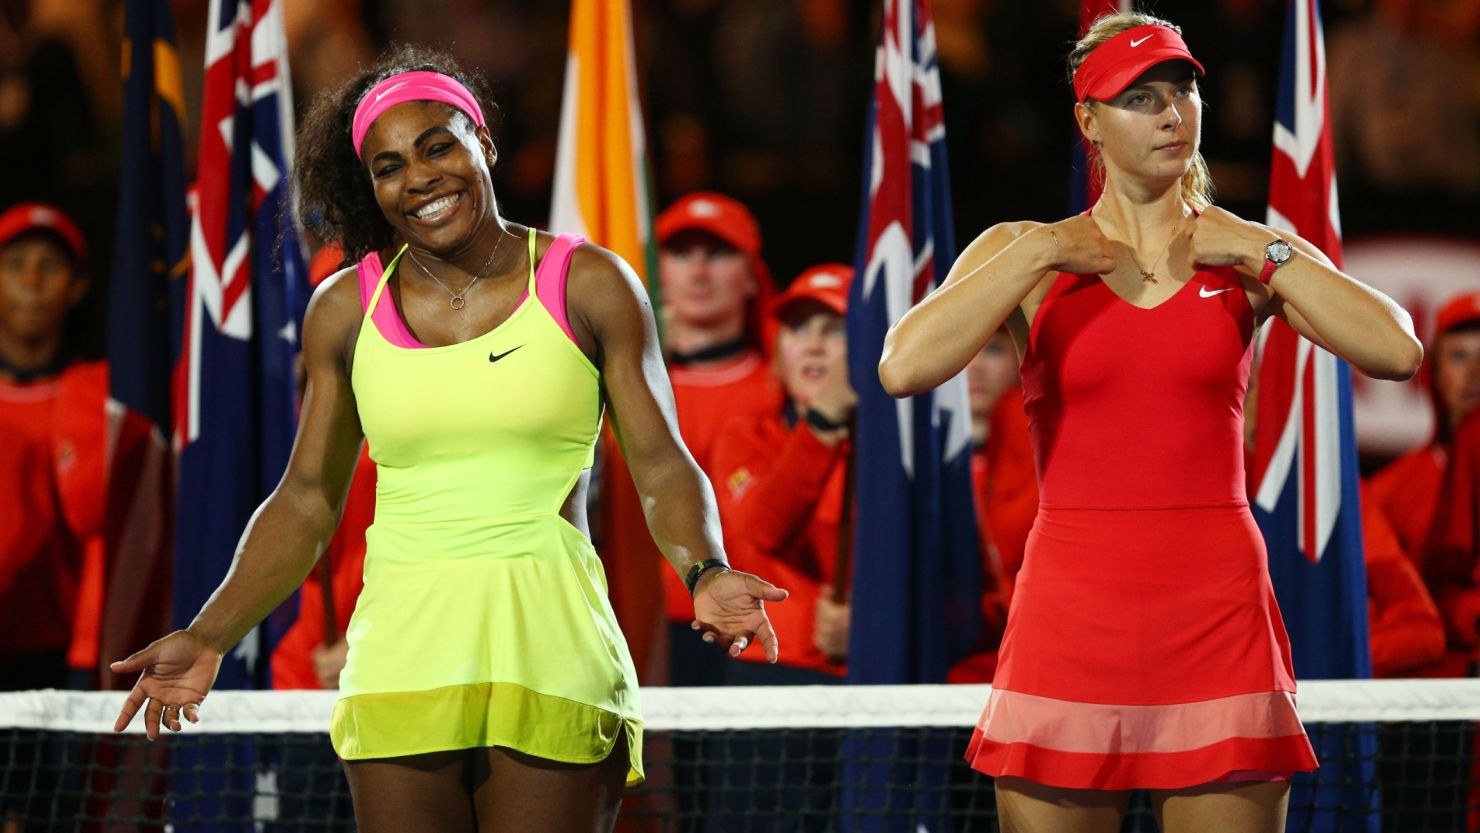 MELBOURNE, AUSTRALIA - JANUARY 31:  Serena Williams of the United States and Maria Sharapova of Russia stand at the presentation after Williams won their women's final match during day 13 of the 2015 Australian Open at Melbourne Park on January 31, 2015 in Melbourne, Australia.  (Photo by Cameron Spencer/Getty Images)